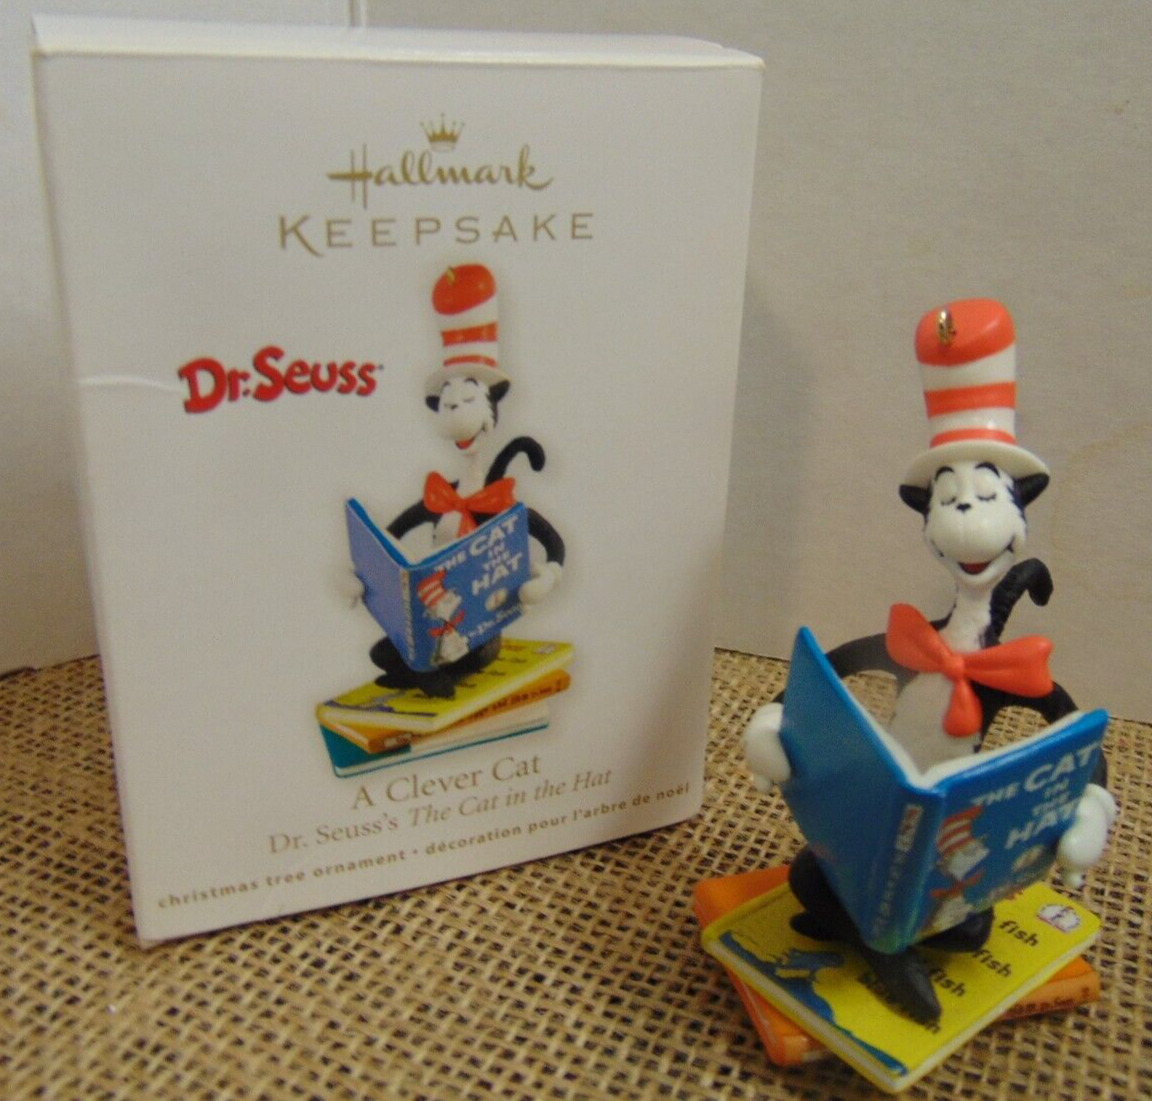 Hallmark Dr Seuss The Cat in the Hat A Clever Cat keepsake ornament